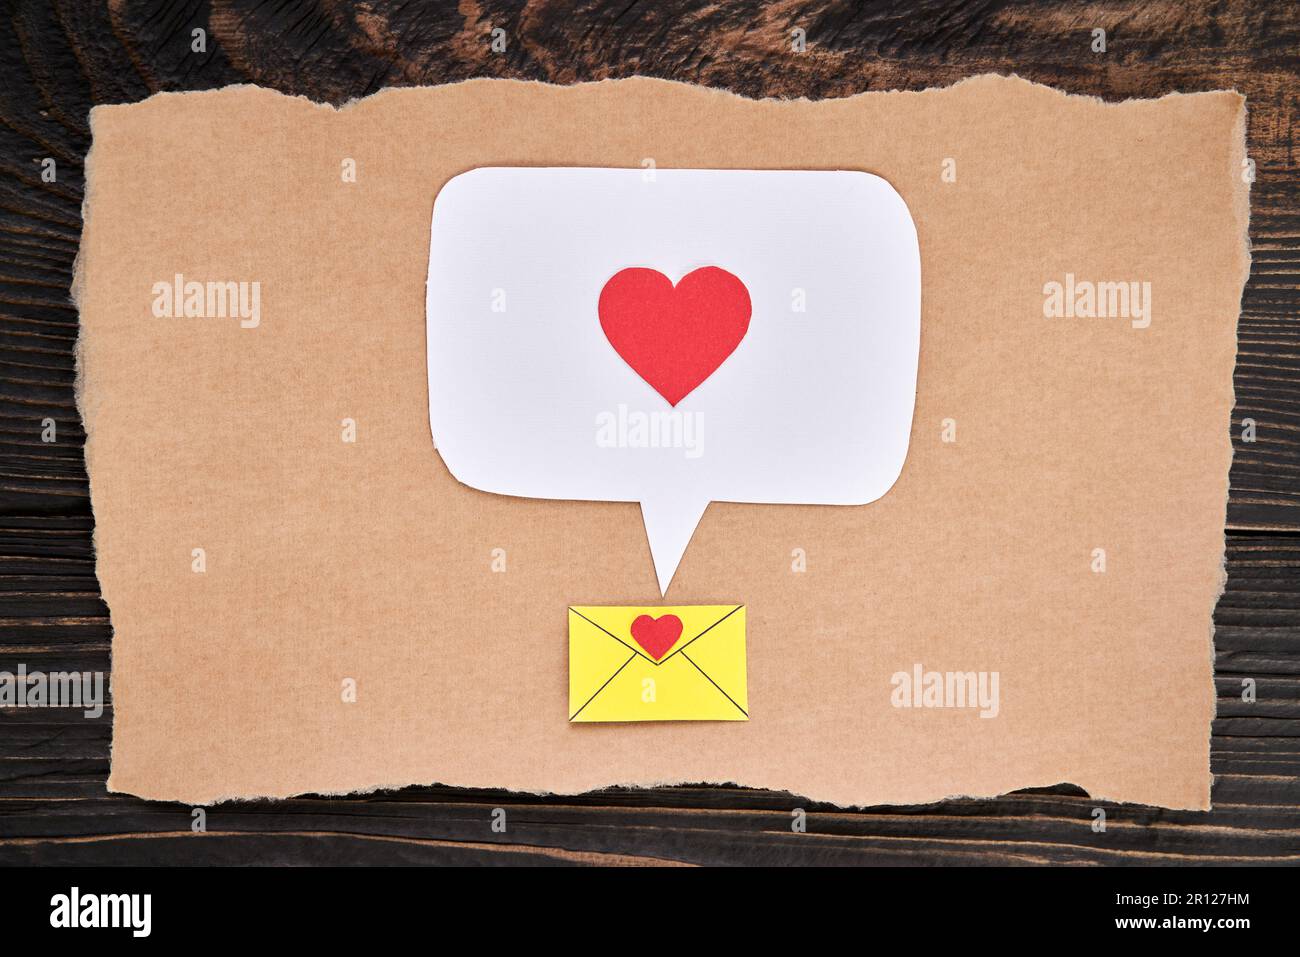 Postcard with email icon, red heart and speech bubble in paper art style. Love letter, greeting card, invitation mockup over dark wooden background. F Stock Photo